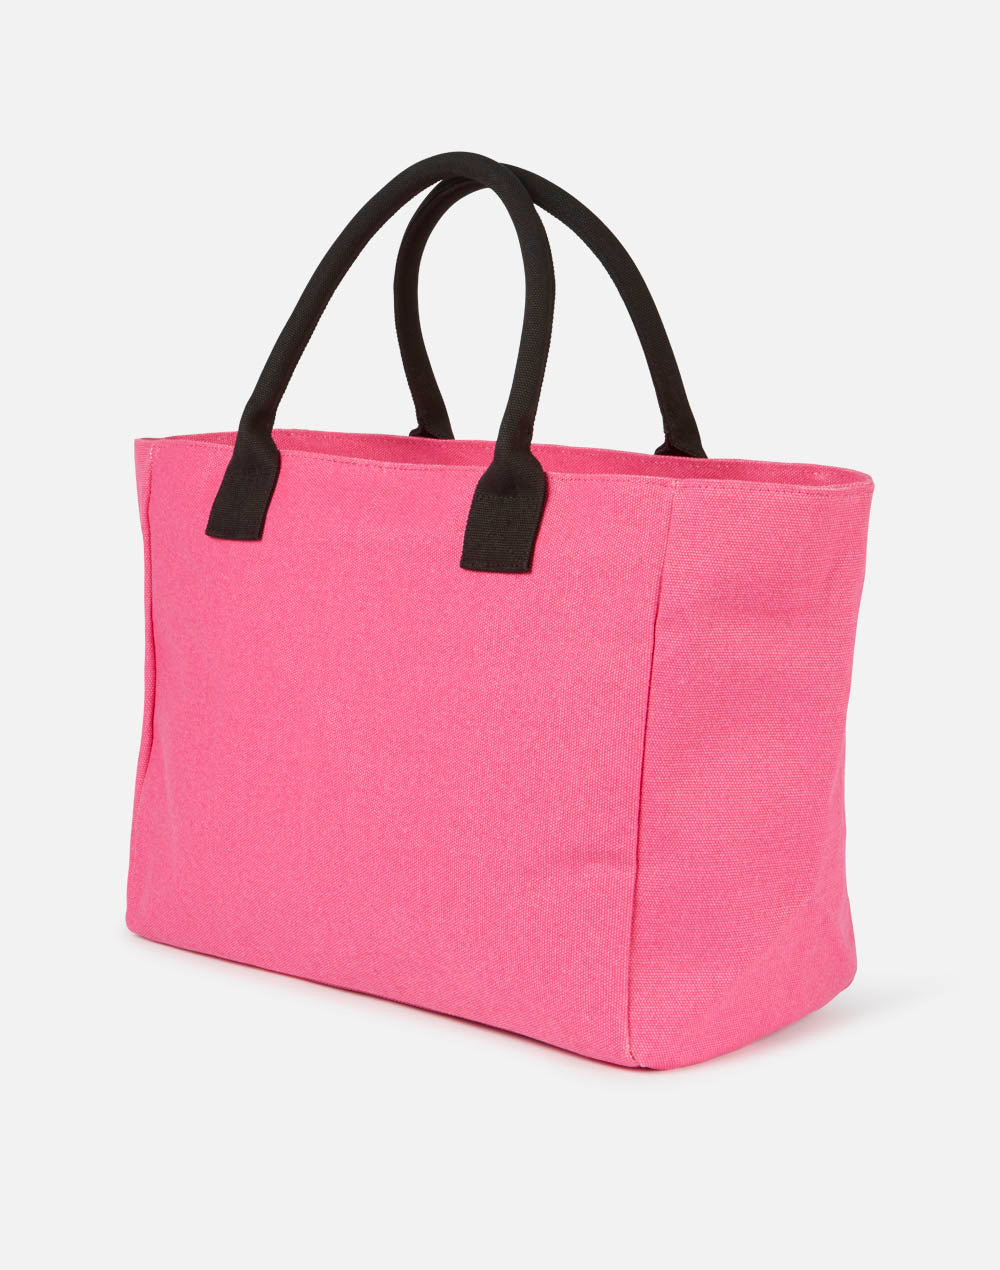 SHOPPER IN COTONE CANVAS STONE WASHED